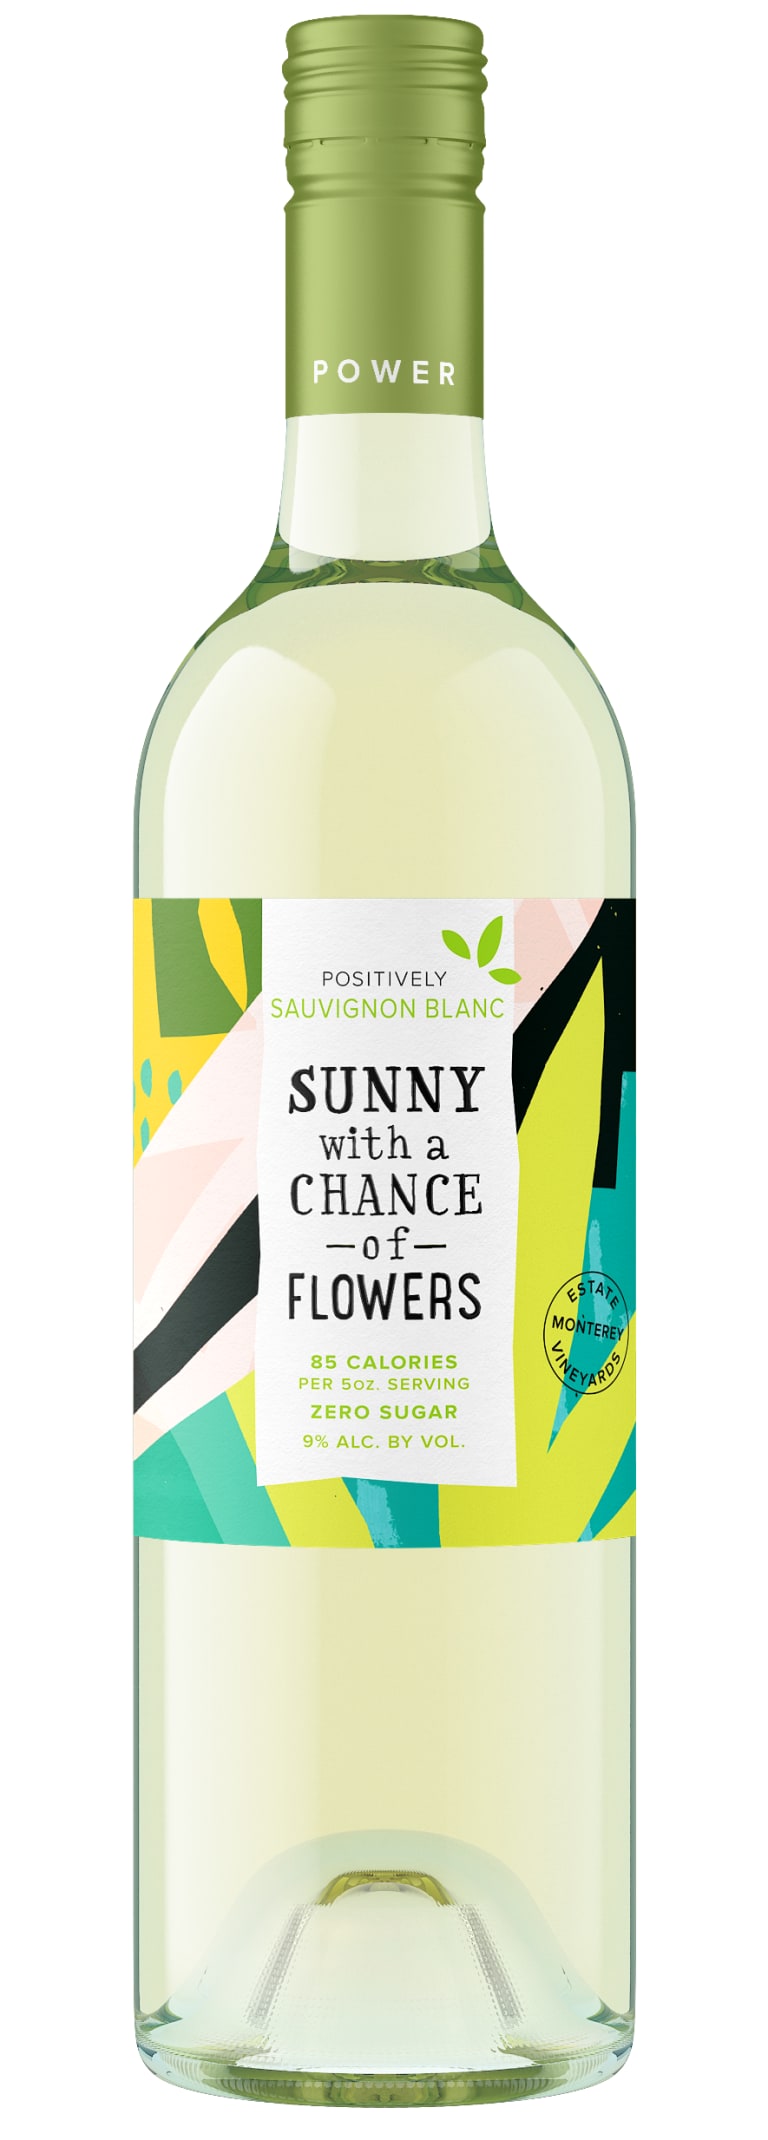 Sunny With A Chance Of Flowers Sauvignon Blanc 2020